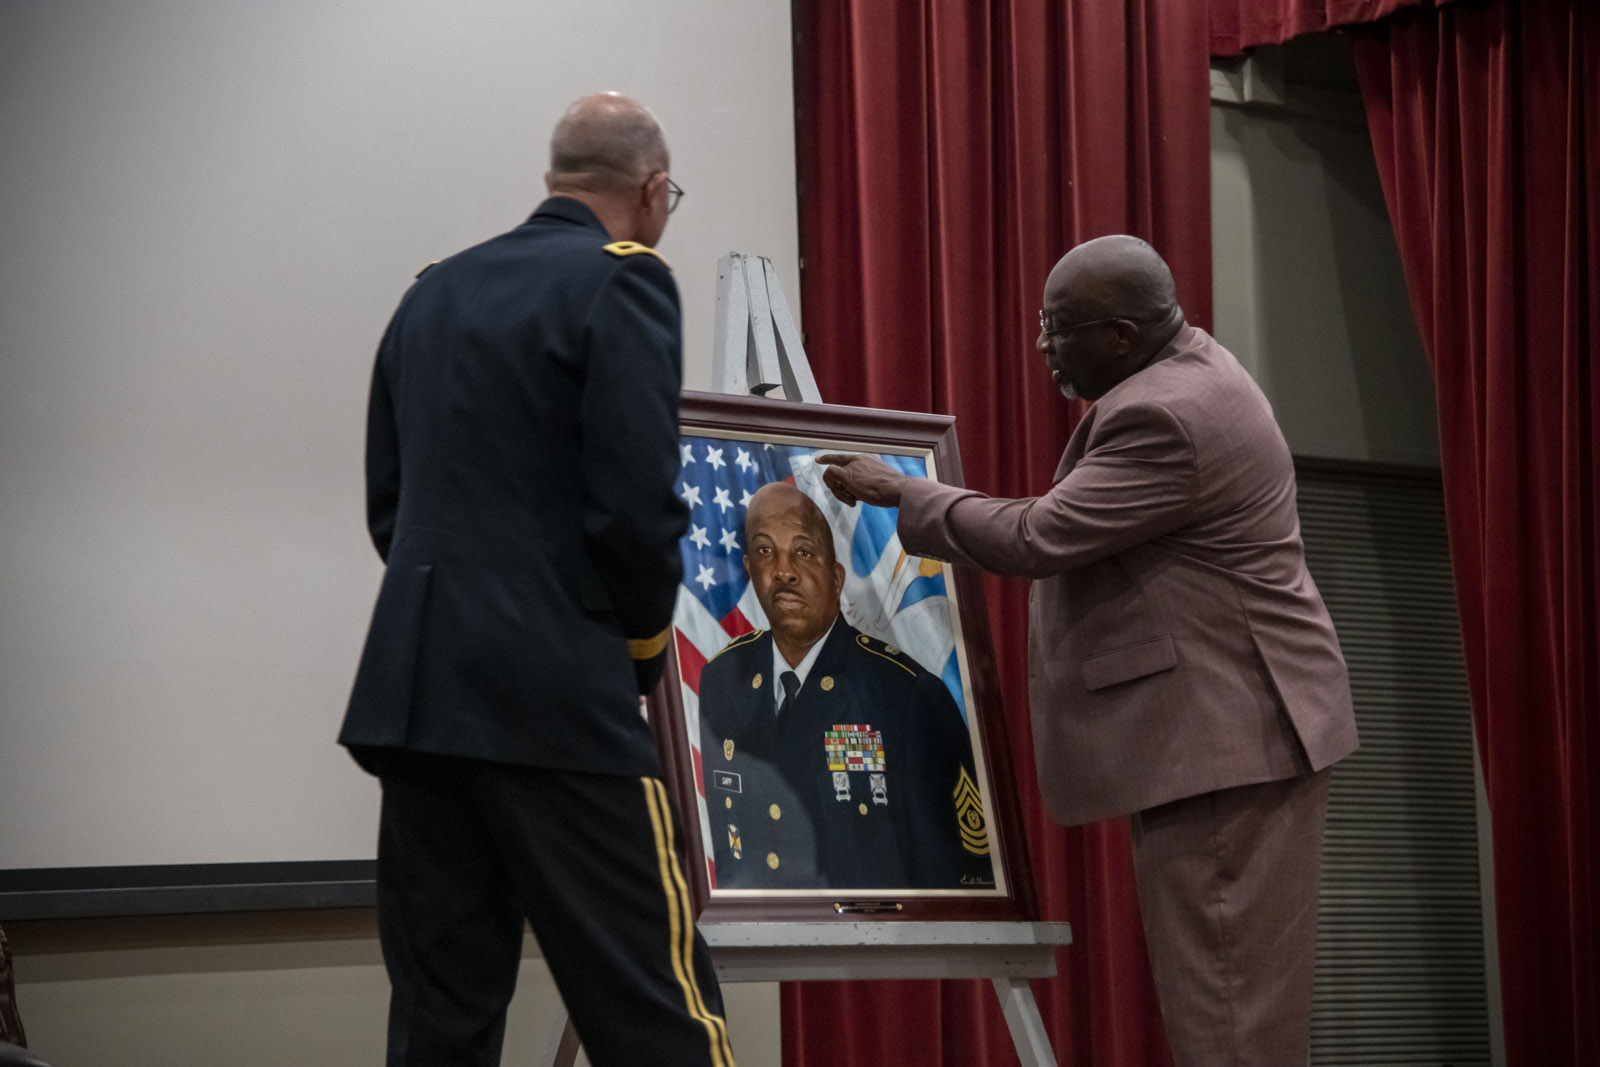 La. Guard command sergeant major inducted into hall of fame